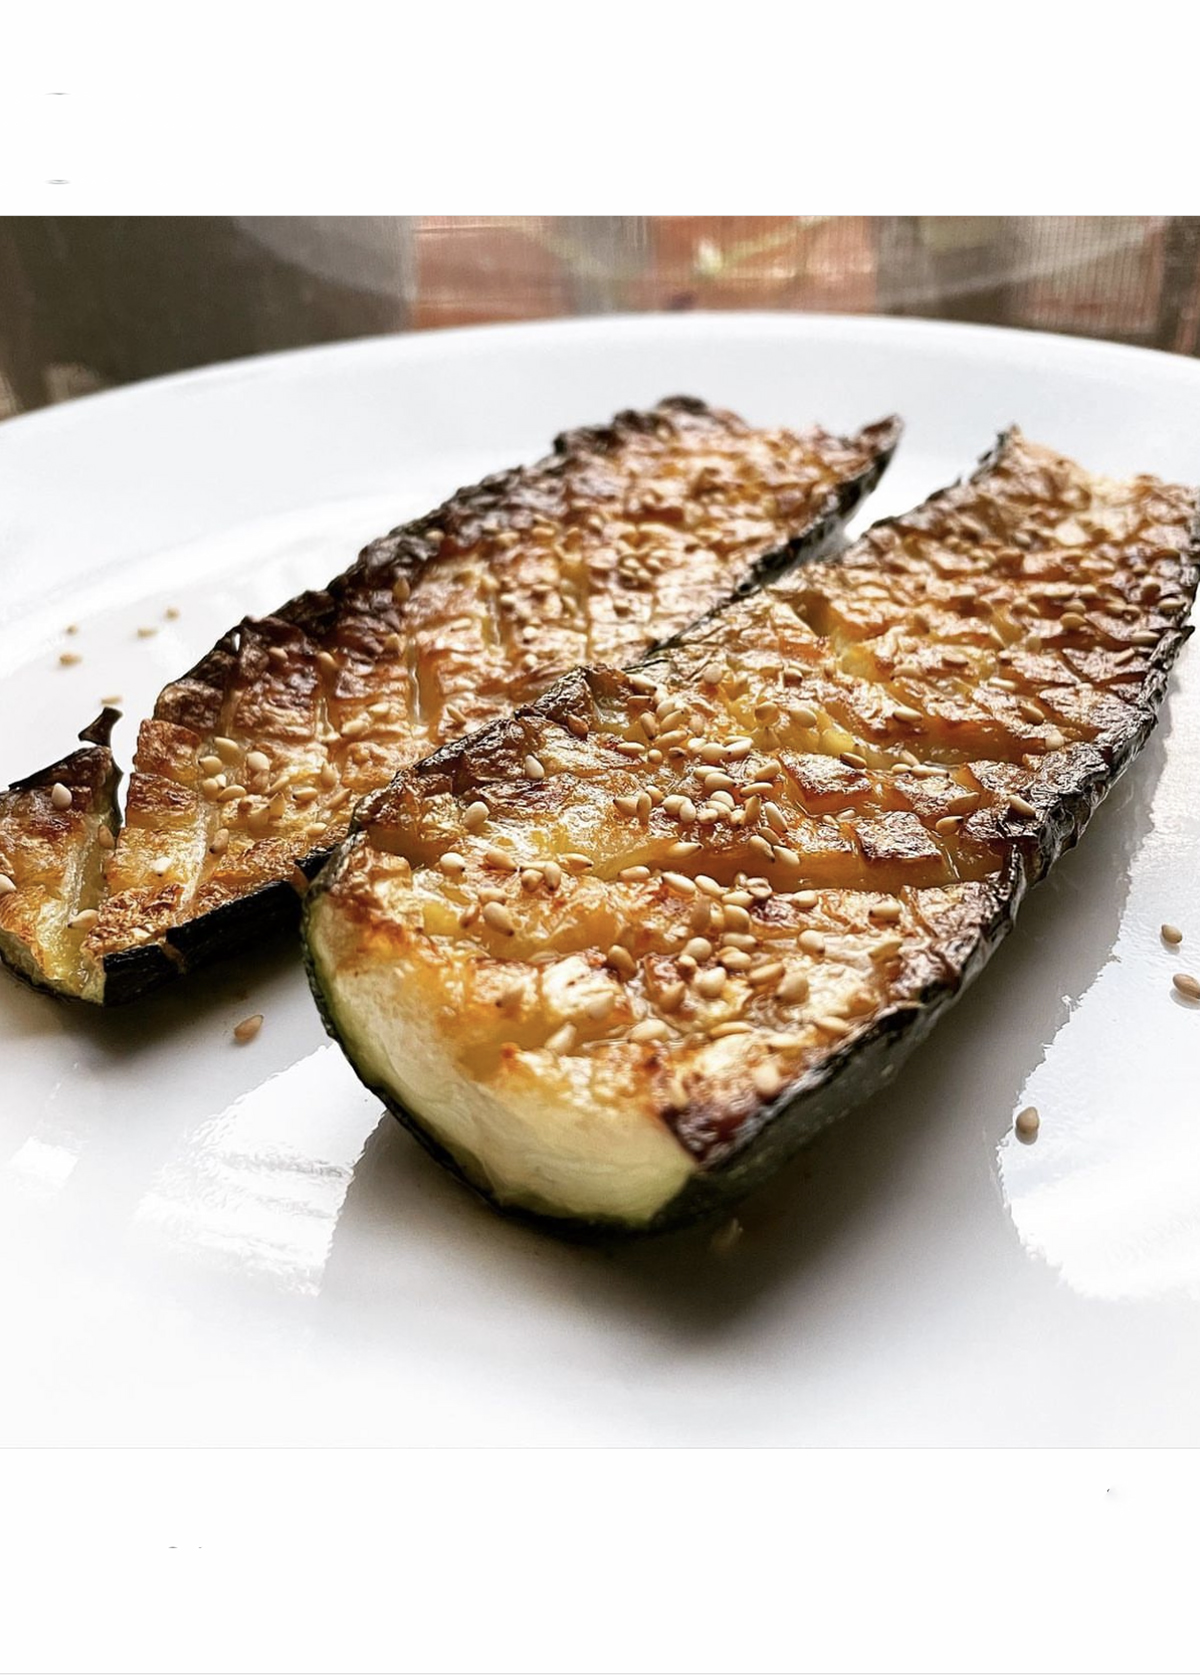 thomas keller oven roasted zucchini, reader review